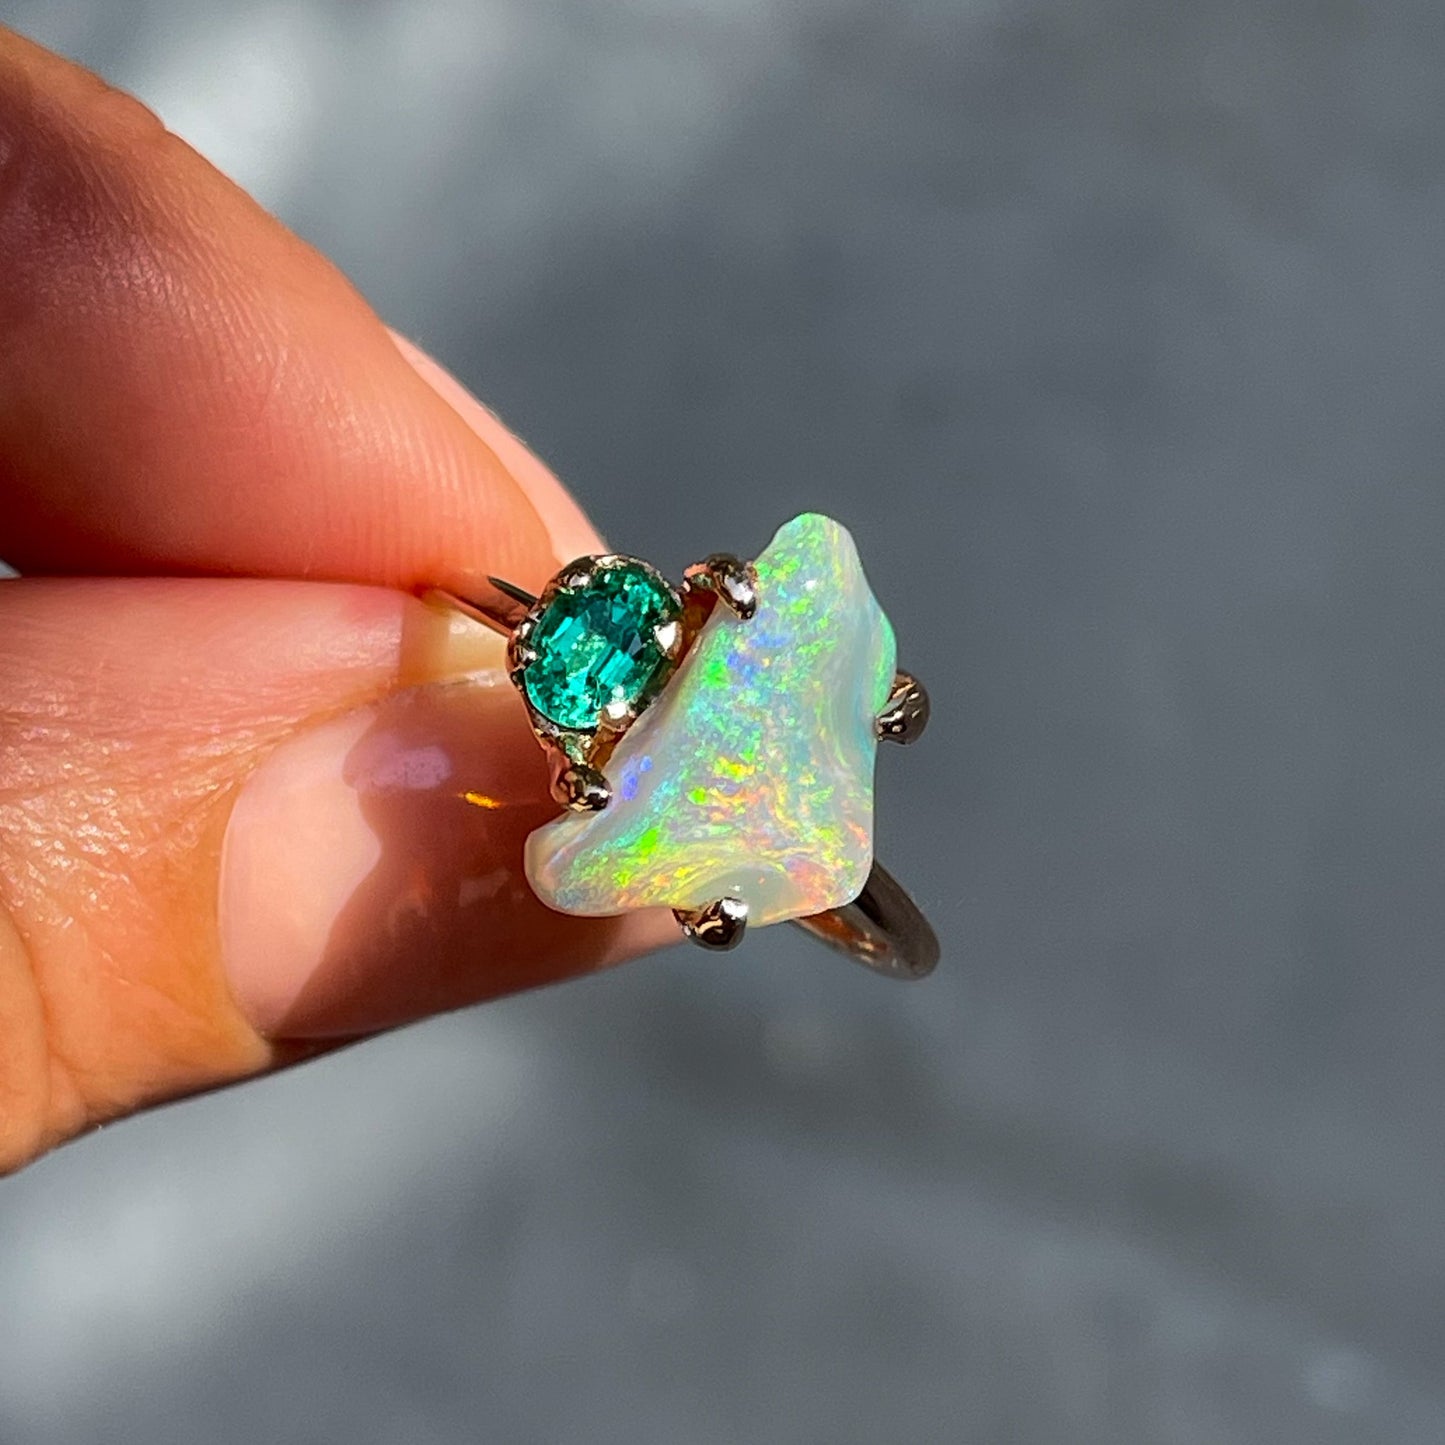 An Opal and Emerald Ring by NIXIN Jewelry held in direct sunlight. The emerald and black opal are secured by prong setting.